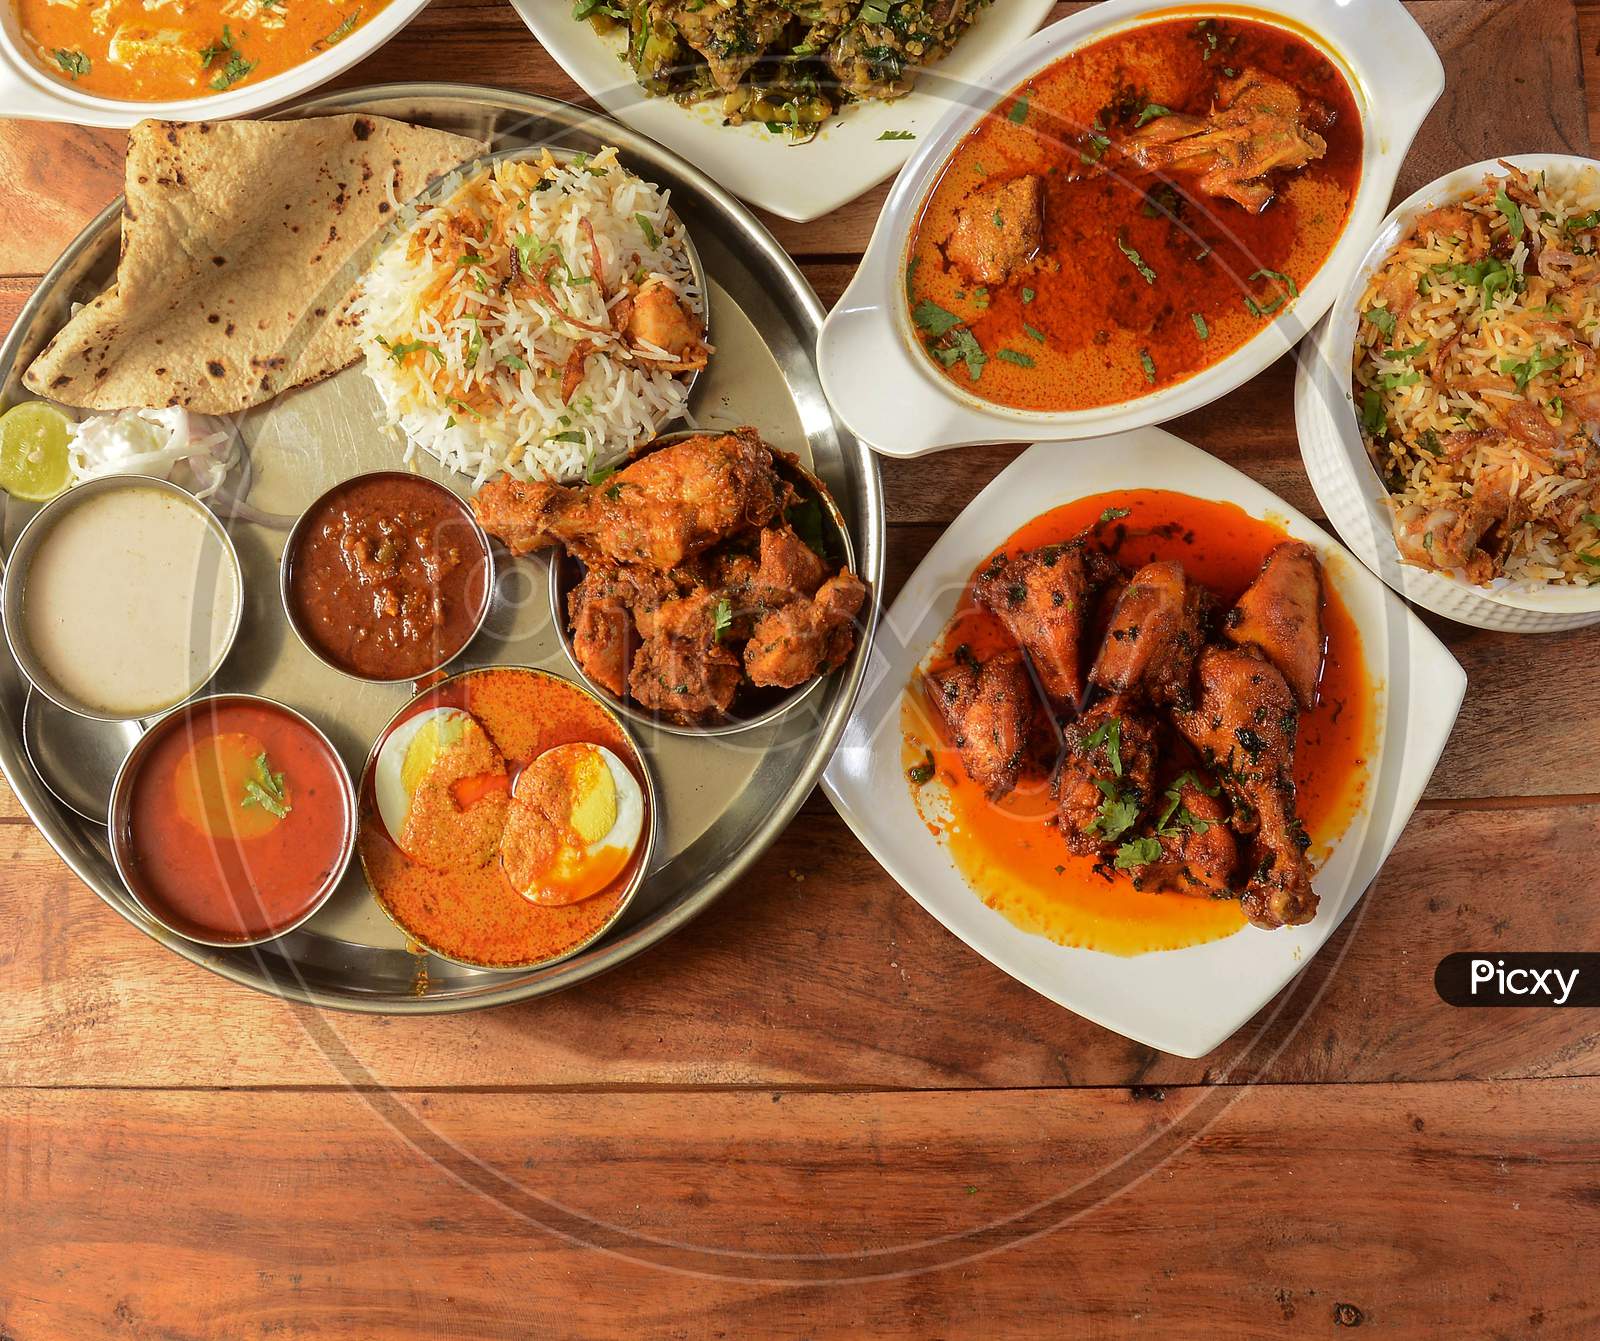 Assorted Indian Foods Pepper Chicken Gravy,Chicken Masala And Nonveg Thali On Wooden Background. Dishes And Appetizers Of Indian Cuisine